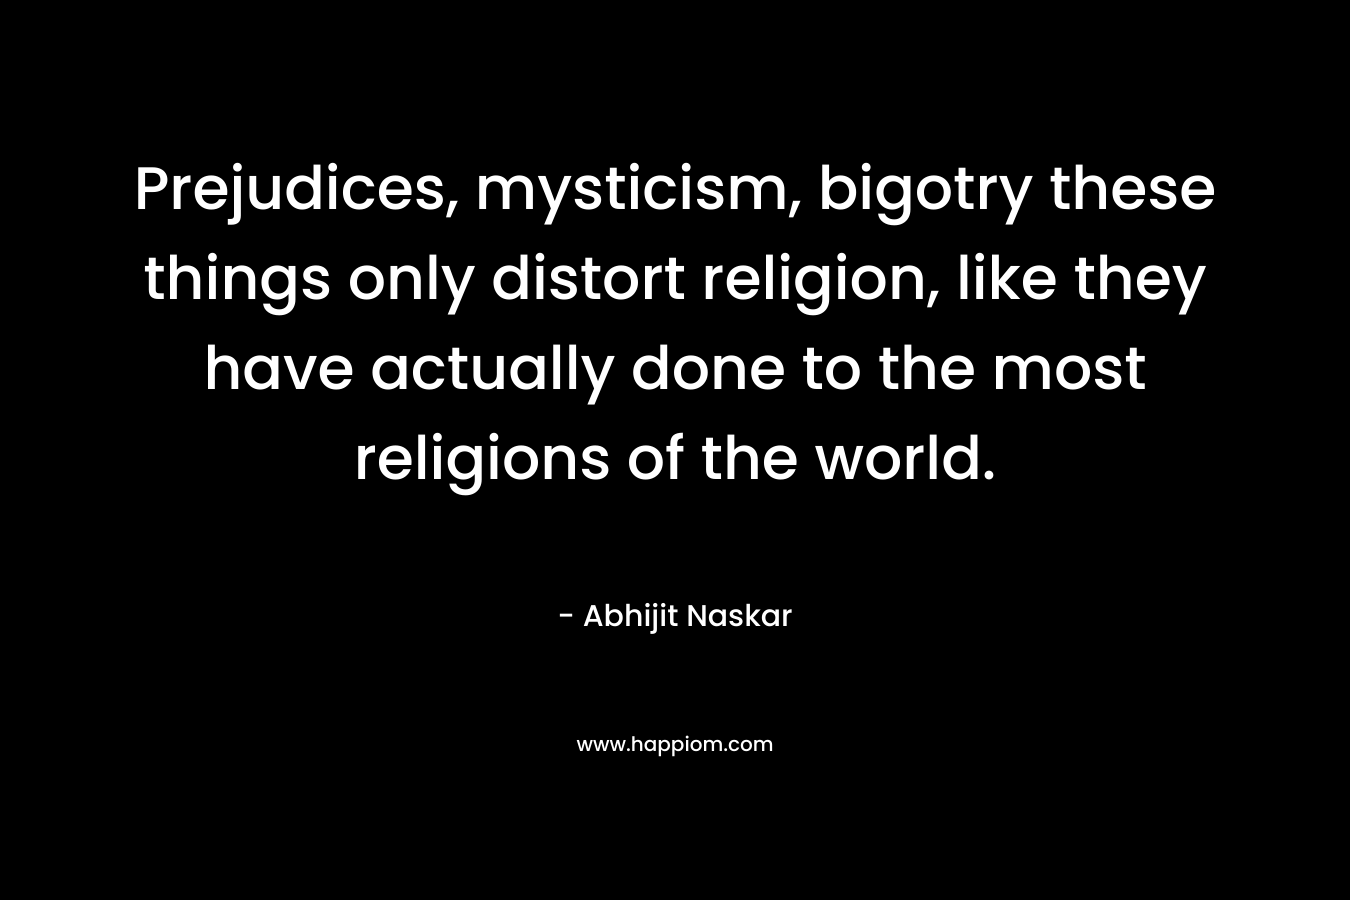 Prejudices, mysticism, bigotry these things only distort religion, like they have actually done to the most religions of the world. – Abhijit Naskar